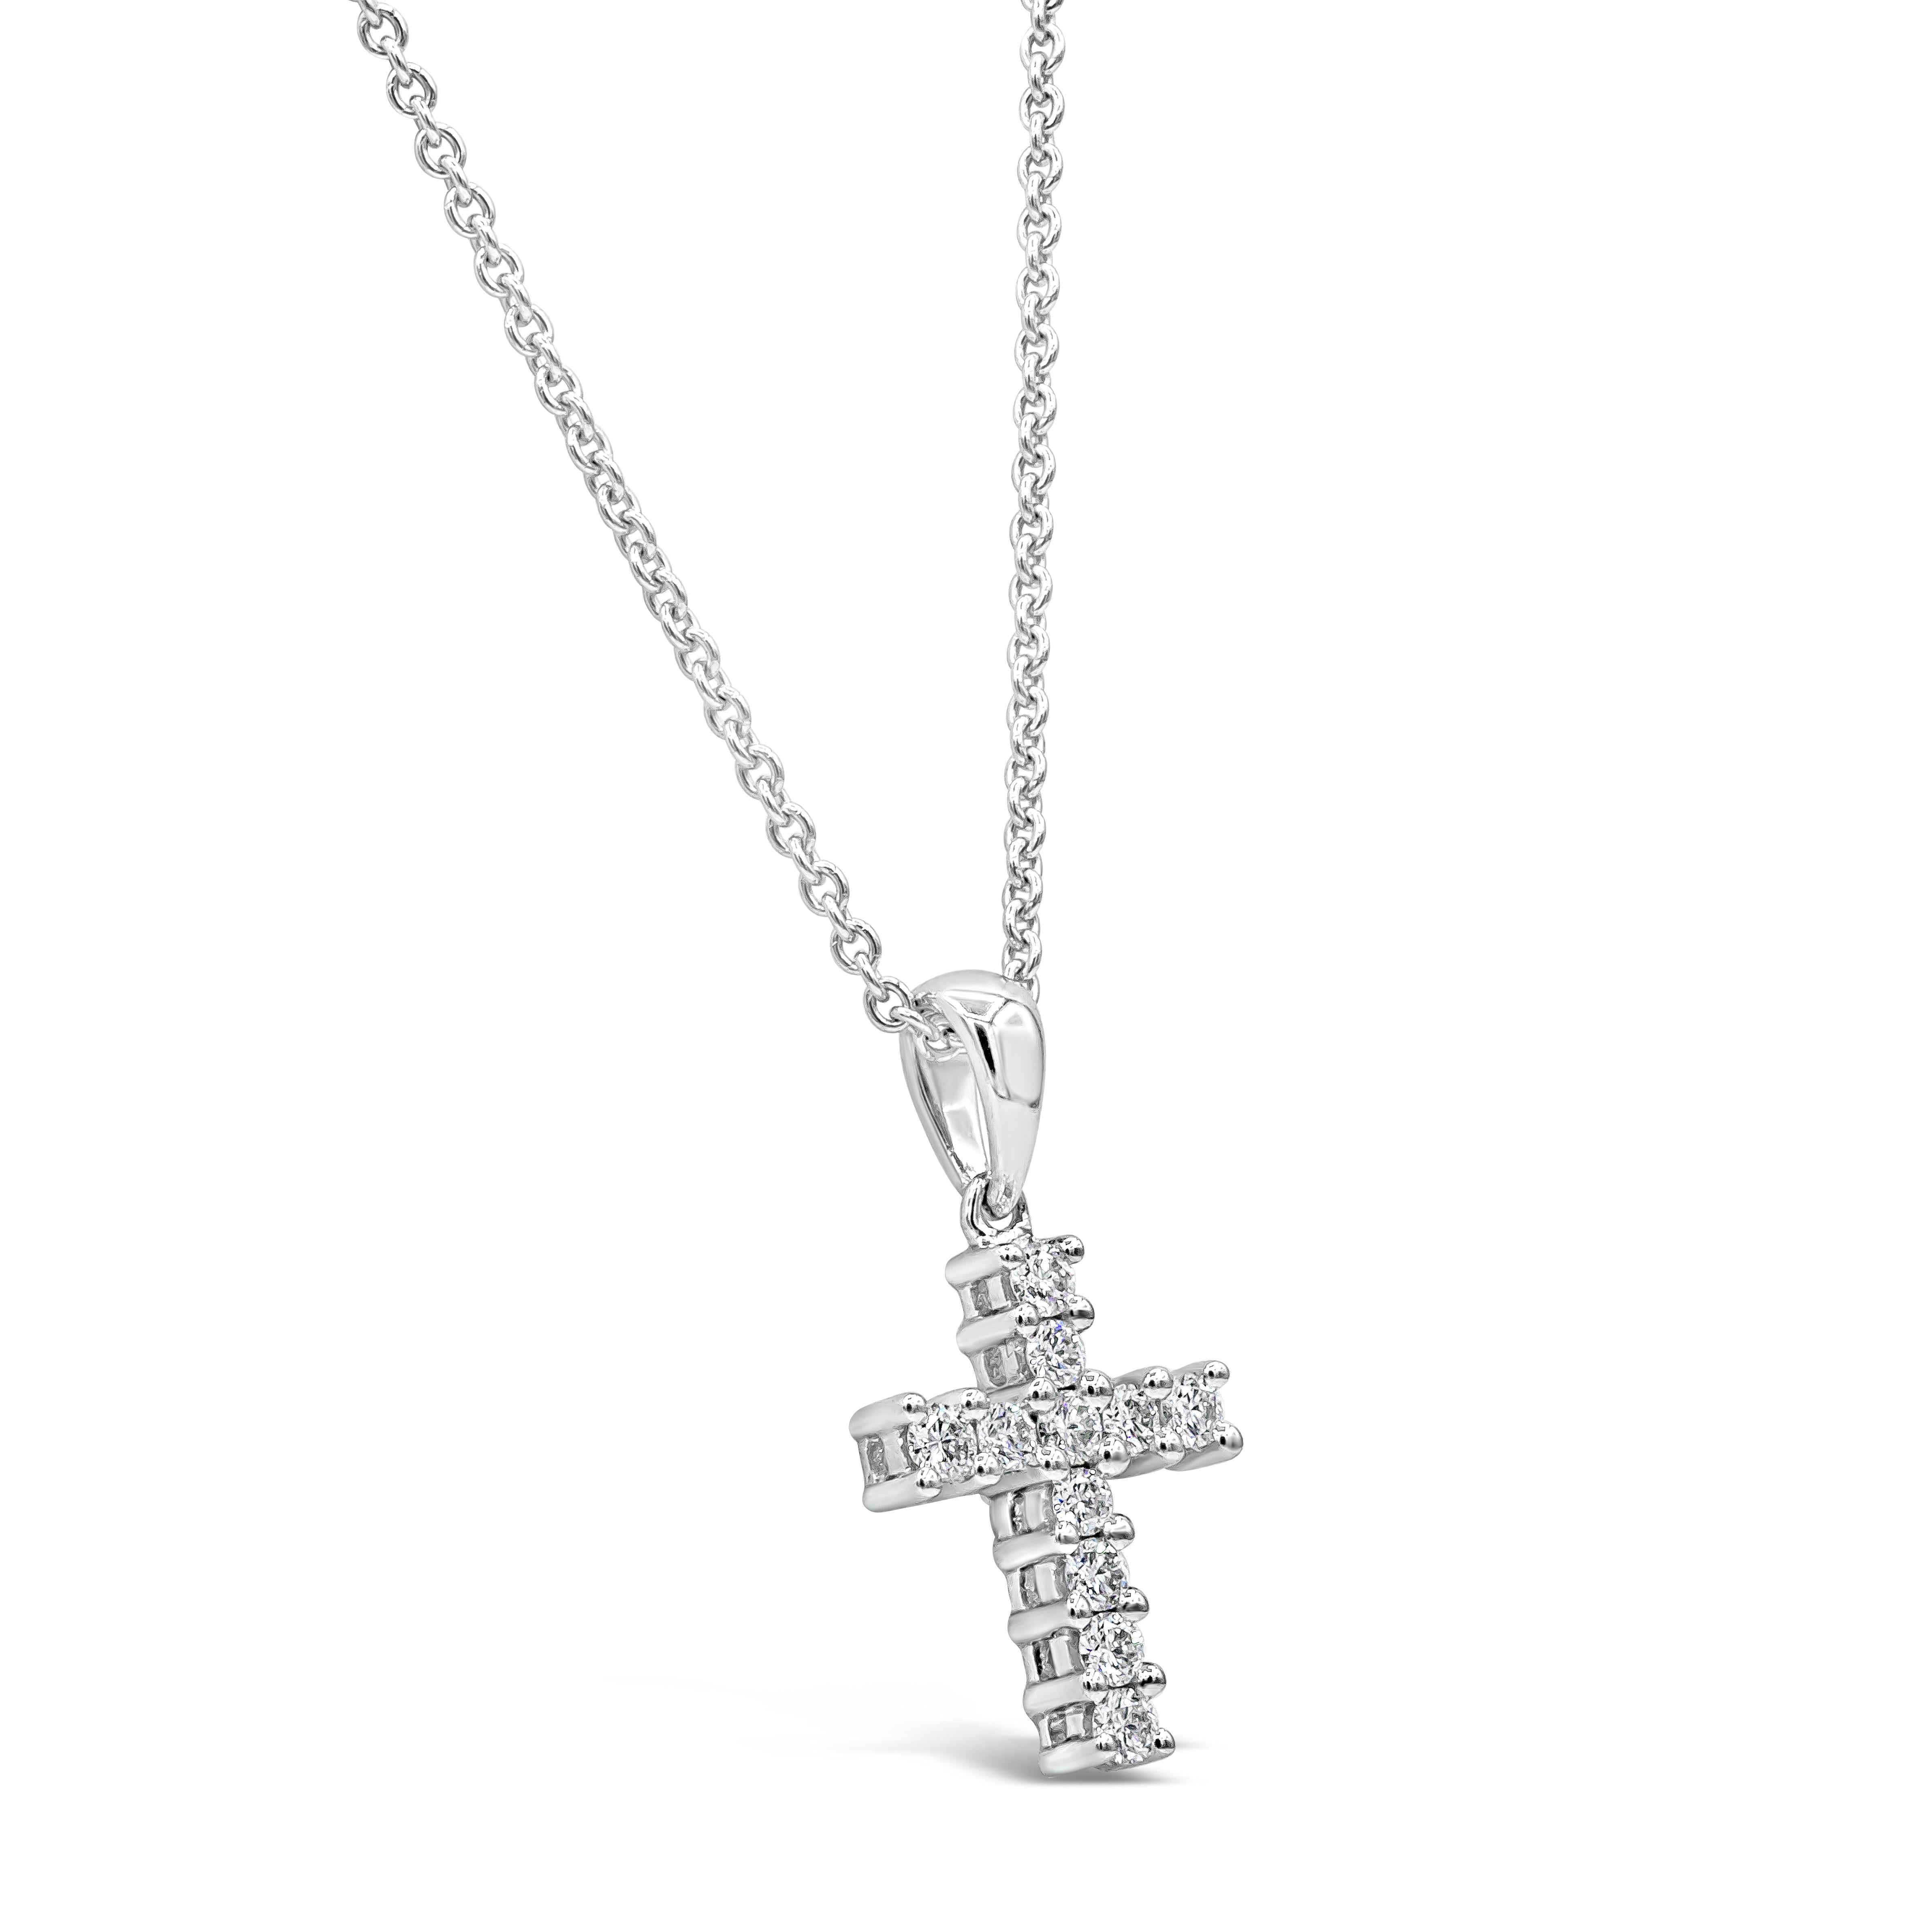 Showcasing round brilliant diamonds set in a traditional cross design made in 18 karat white gold. Diamonds weigh 0.19 carats total. Suspended on a 16 inch white gold chain (adjustable upon request).

Style available in different price ranges.